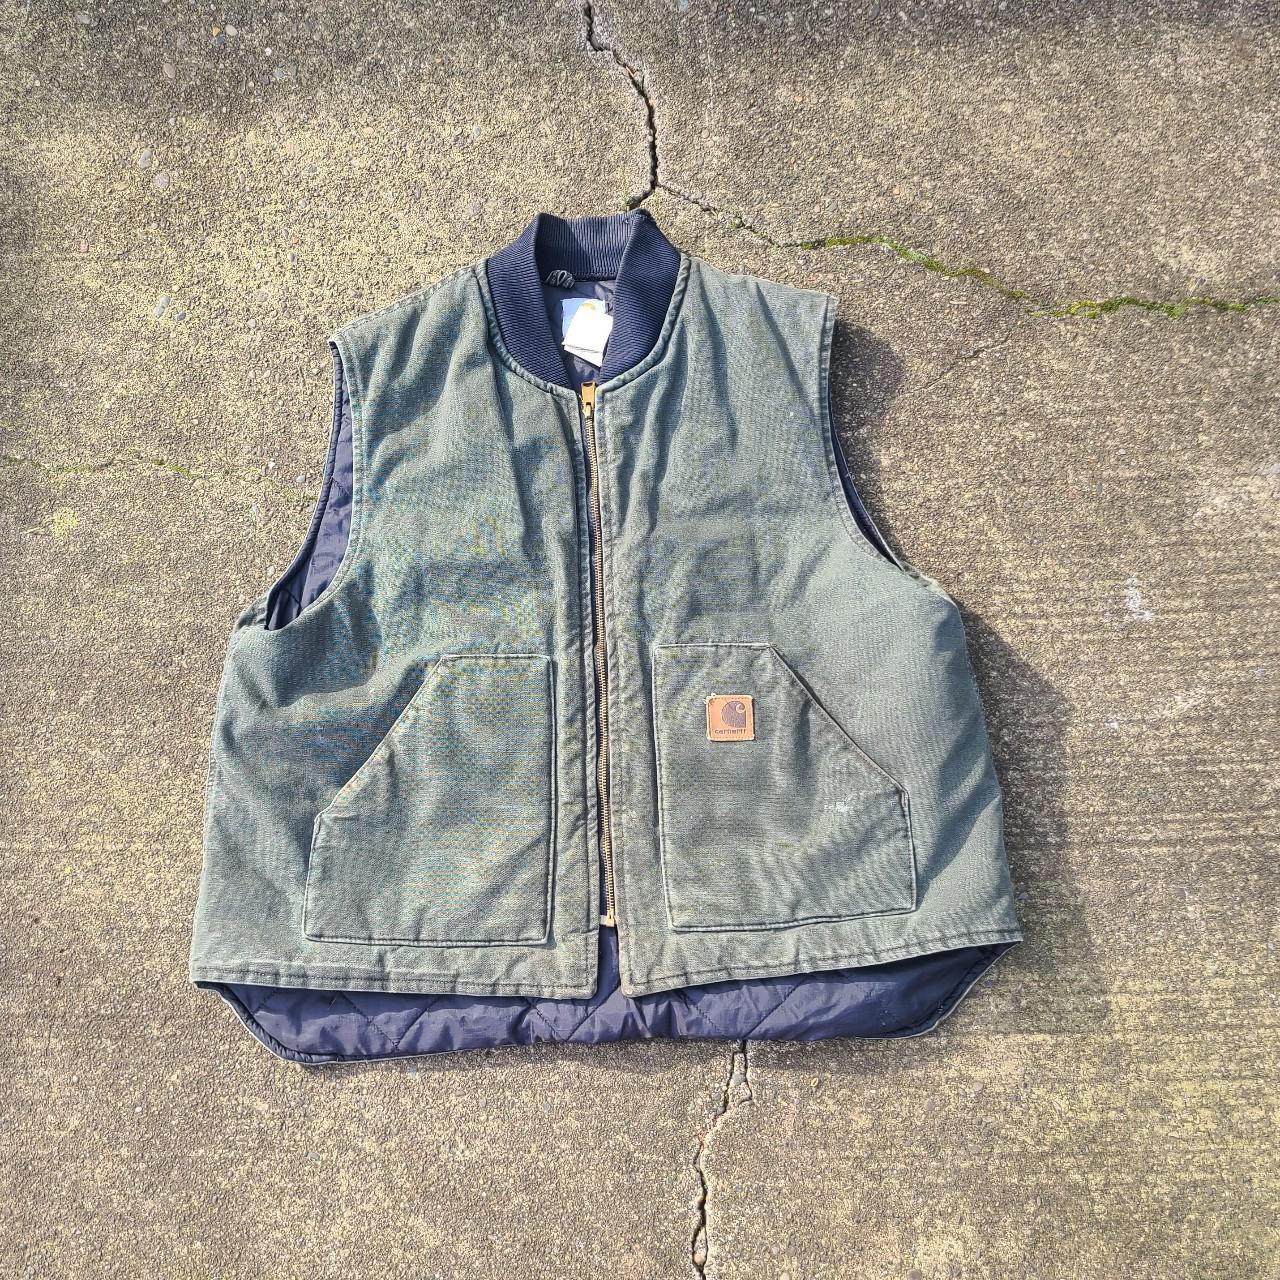 Vintage 90s Carhartt Vest, Made in USA., Stay warm...